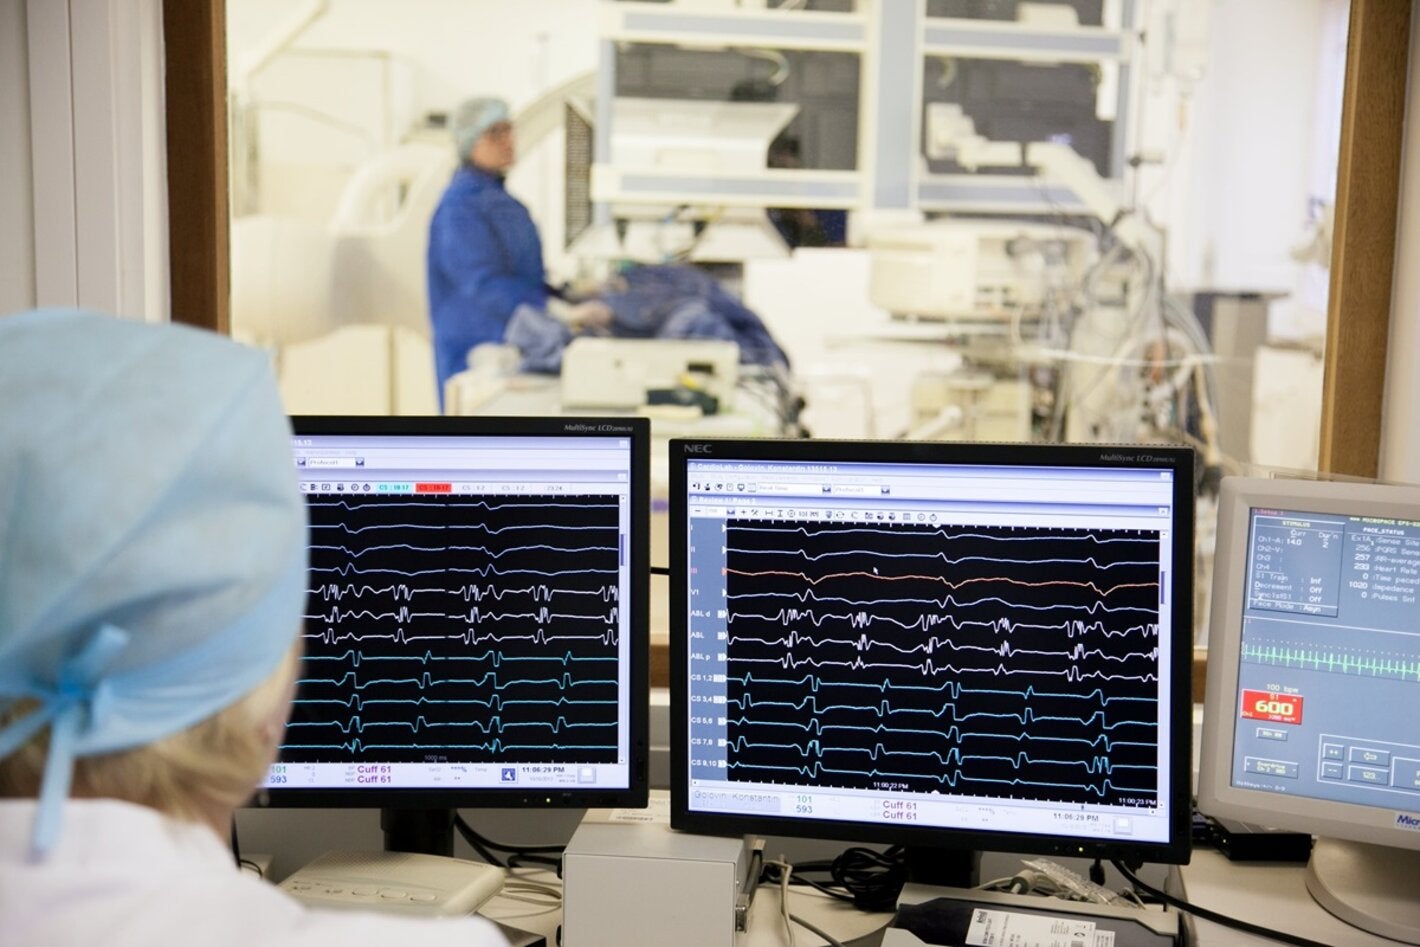 Photo of the back of the head of a healthworker, behing him three screens showing paralel lines that indicates the heart function. Behind the screens there is a big window leading to a room with health equipment where another health worker is accompanying a patient laid on the machine